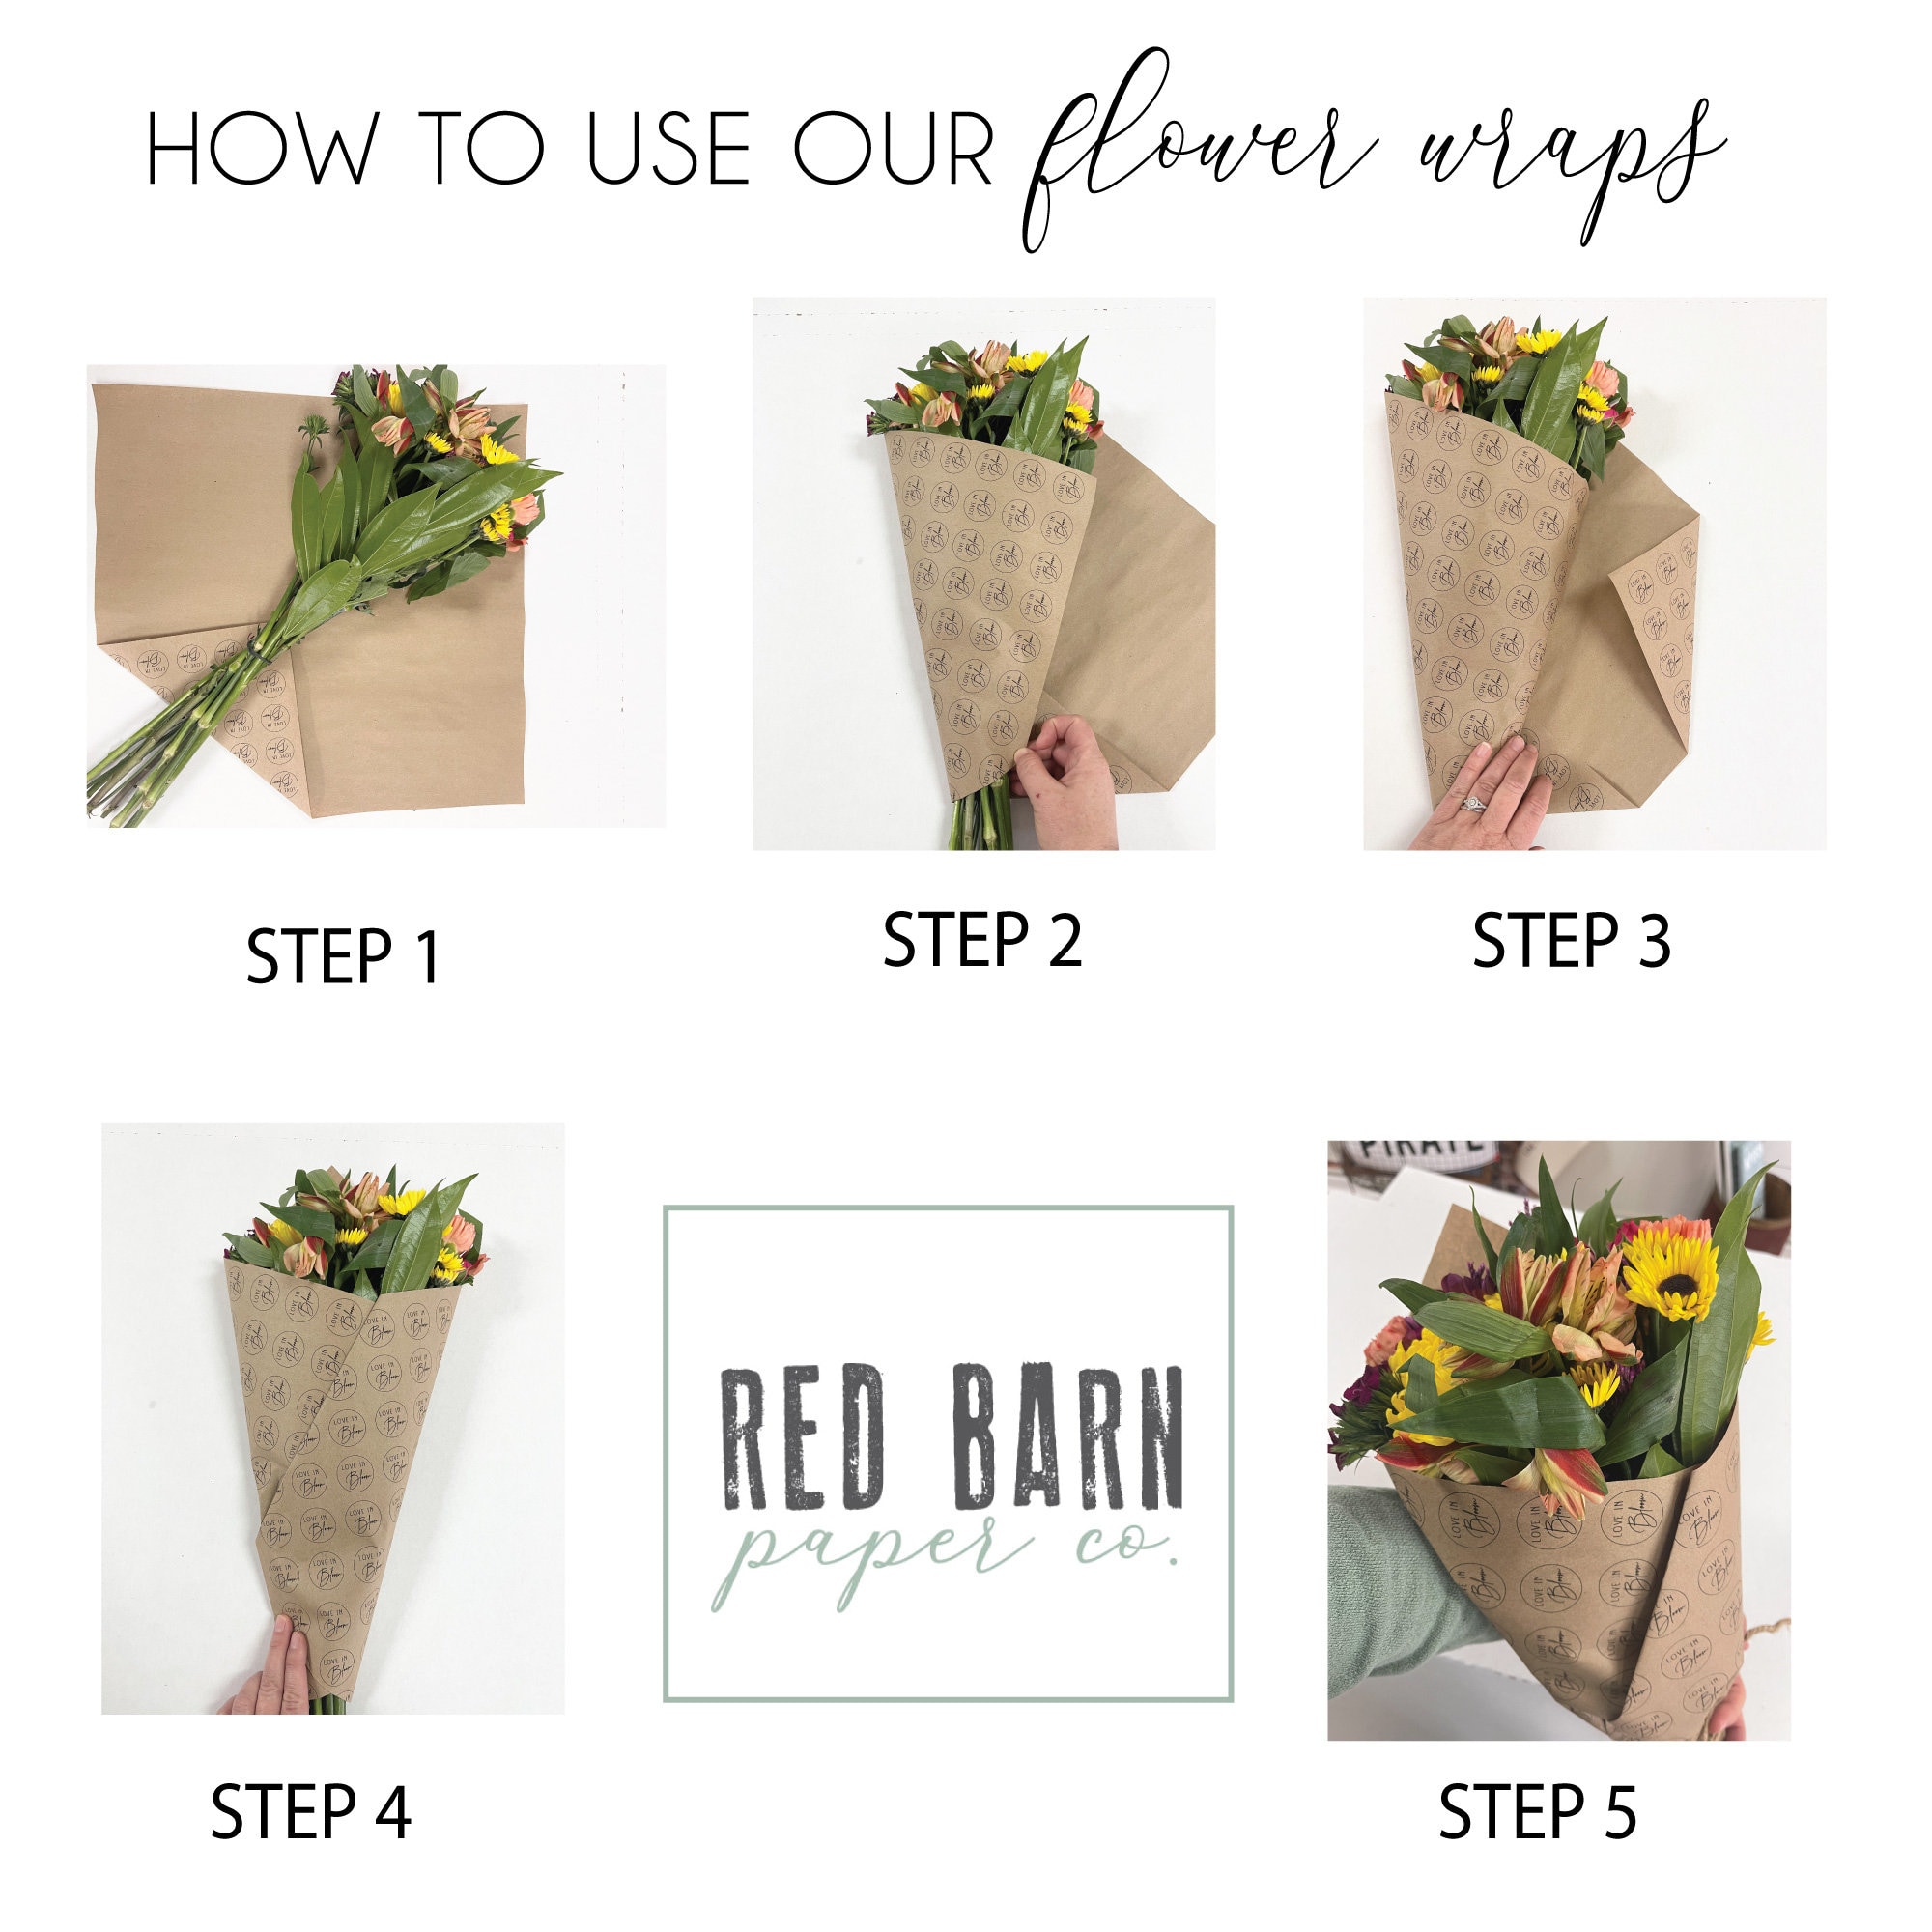 How To Wrap A Bouquet Of Flowers: A Step-by-Step Guide » FloraQueen EN